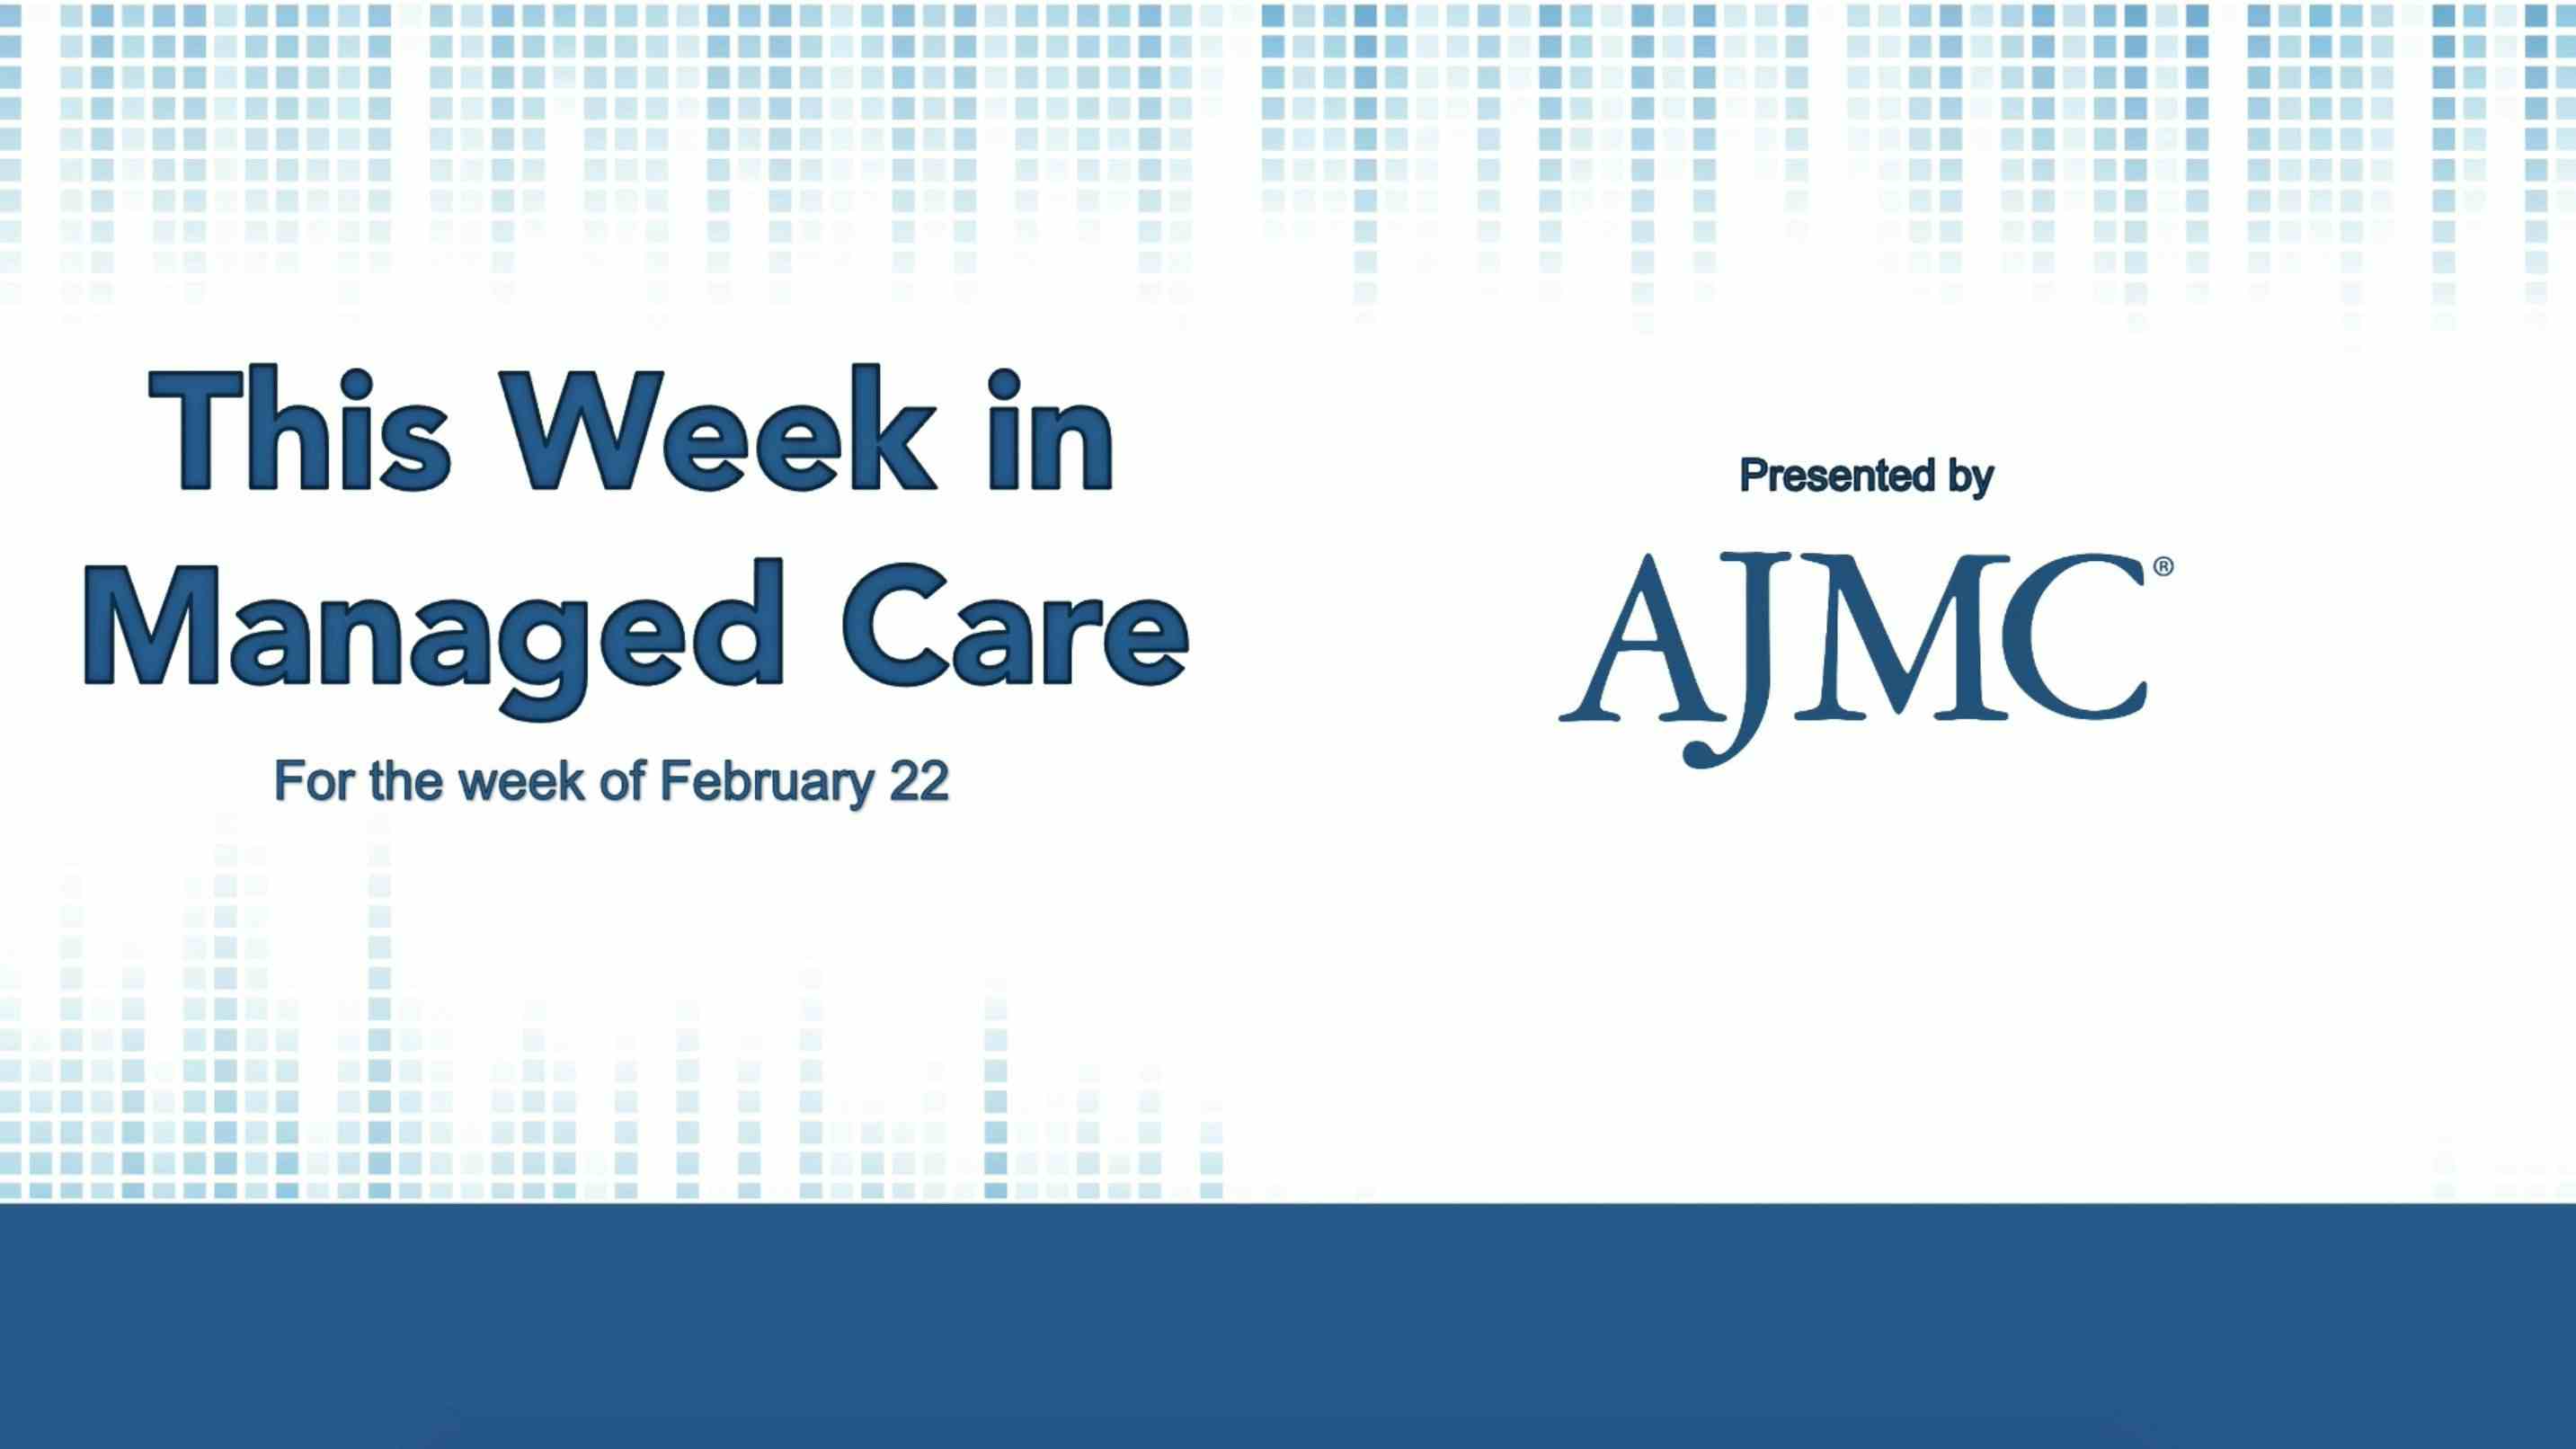 This Week in Managed Care: February 26, 2021